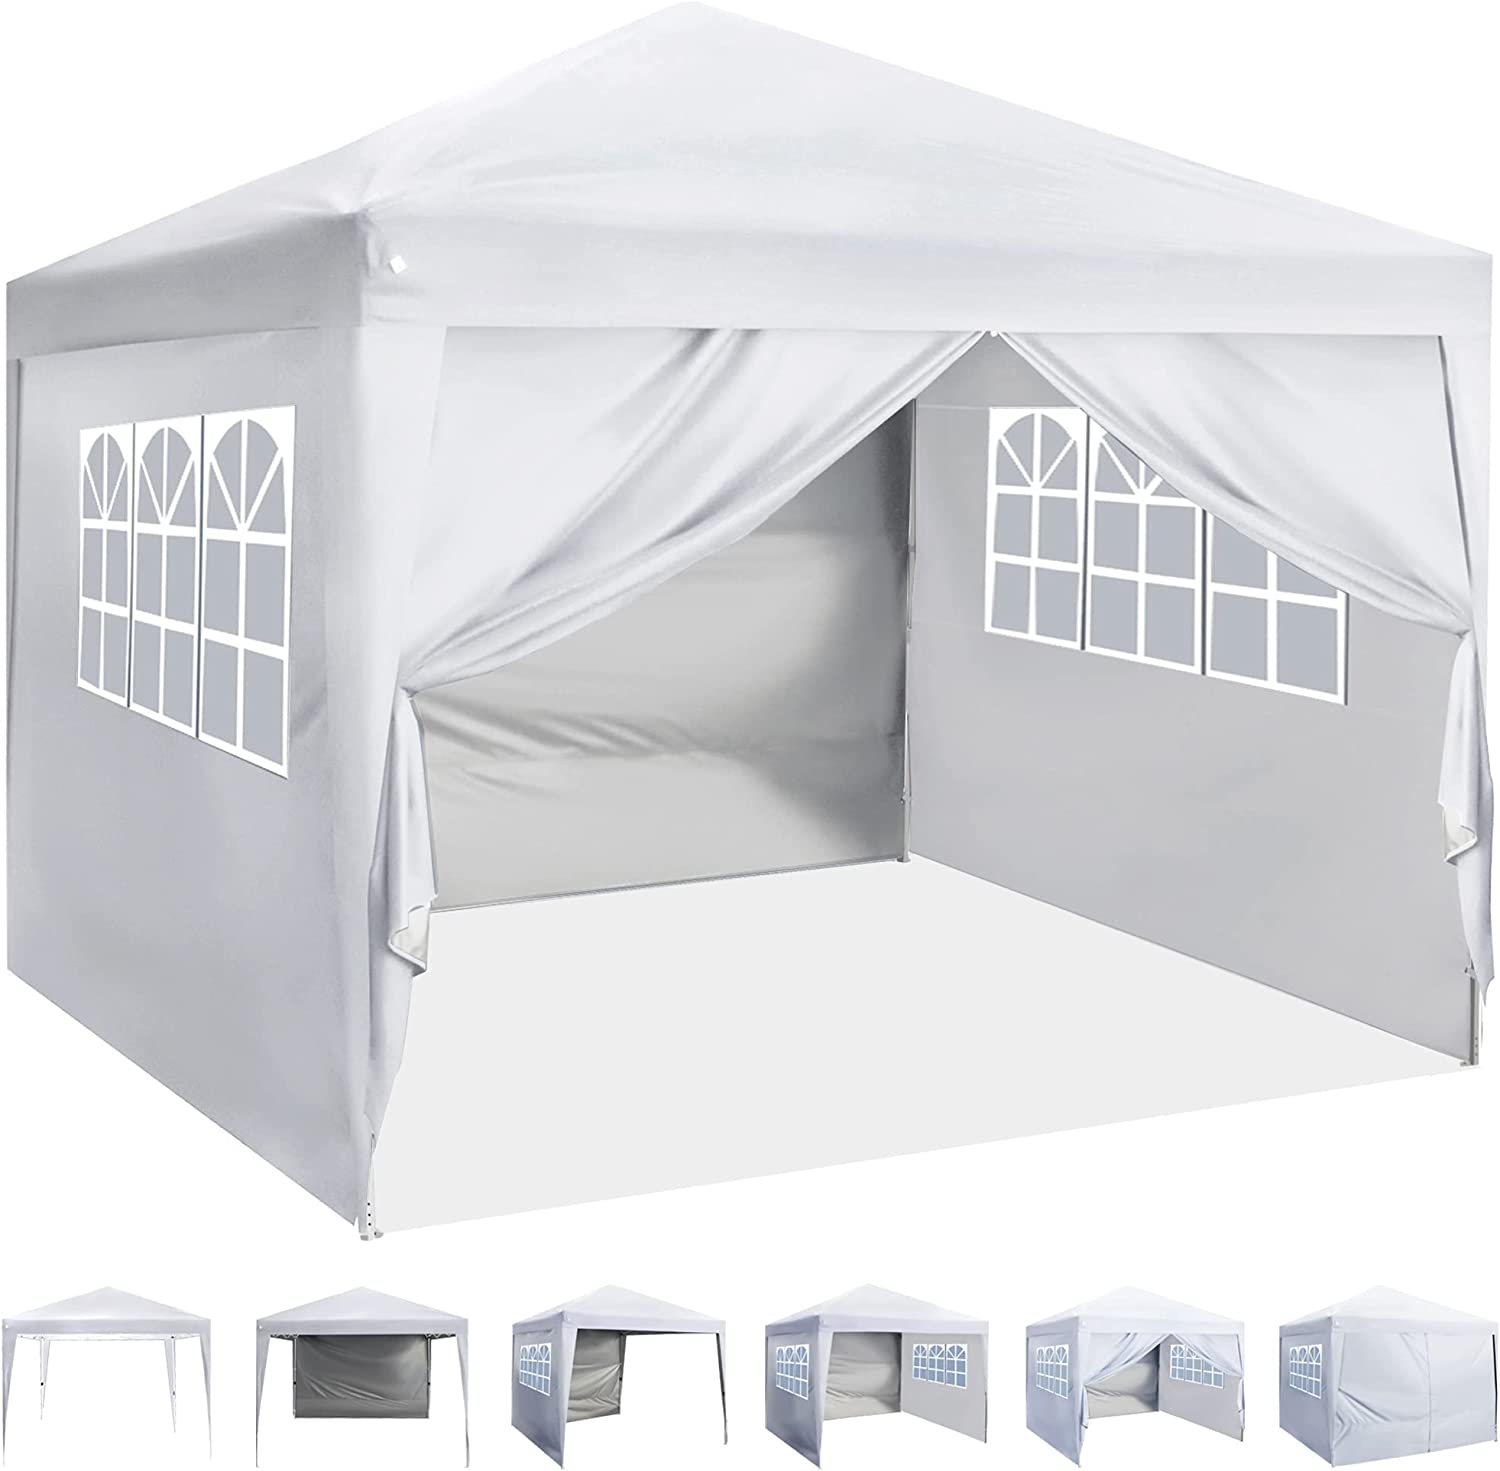 ASTEROUTDOOR Water Resistant Anti-Rust Canopy Tent With Sidewalls